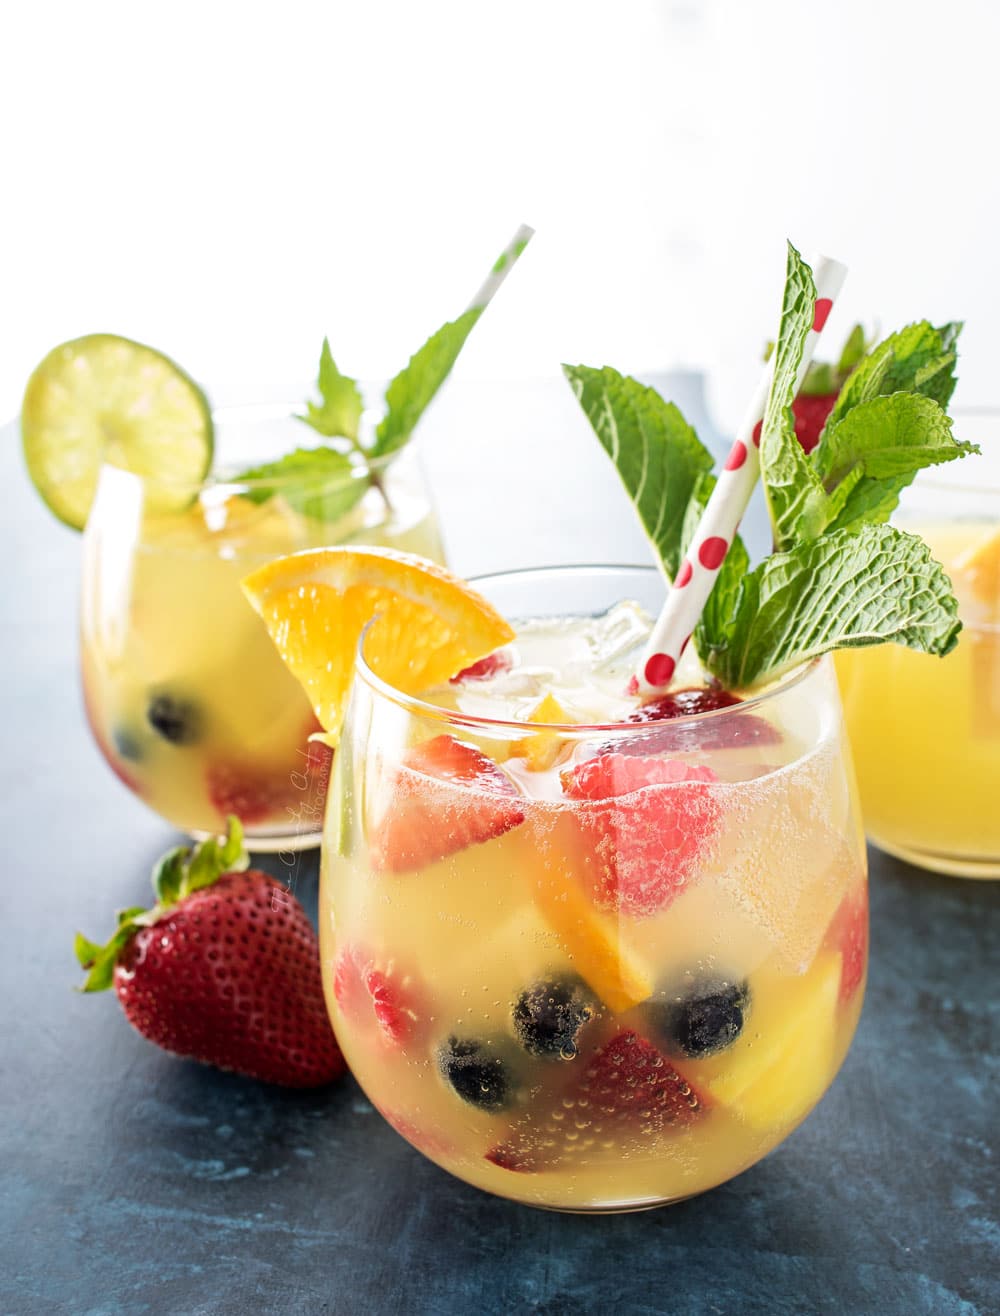 Summer Pineapple Punch | This sweet and easy to make pineapple punch will be the hit of any party! Just 4 simple ingredients plus fresh fruit and pretty garnishes! | http://thechunkychef.com